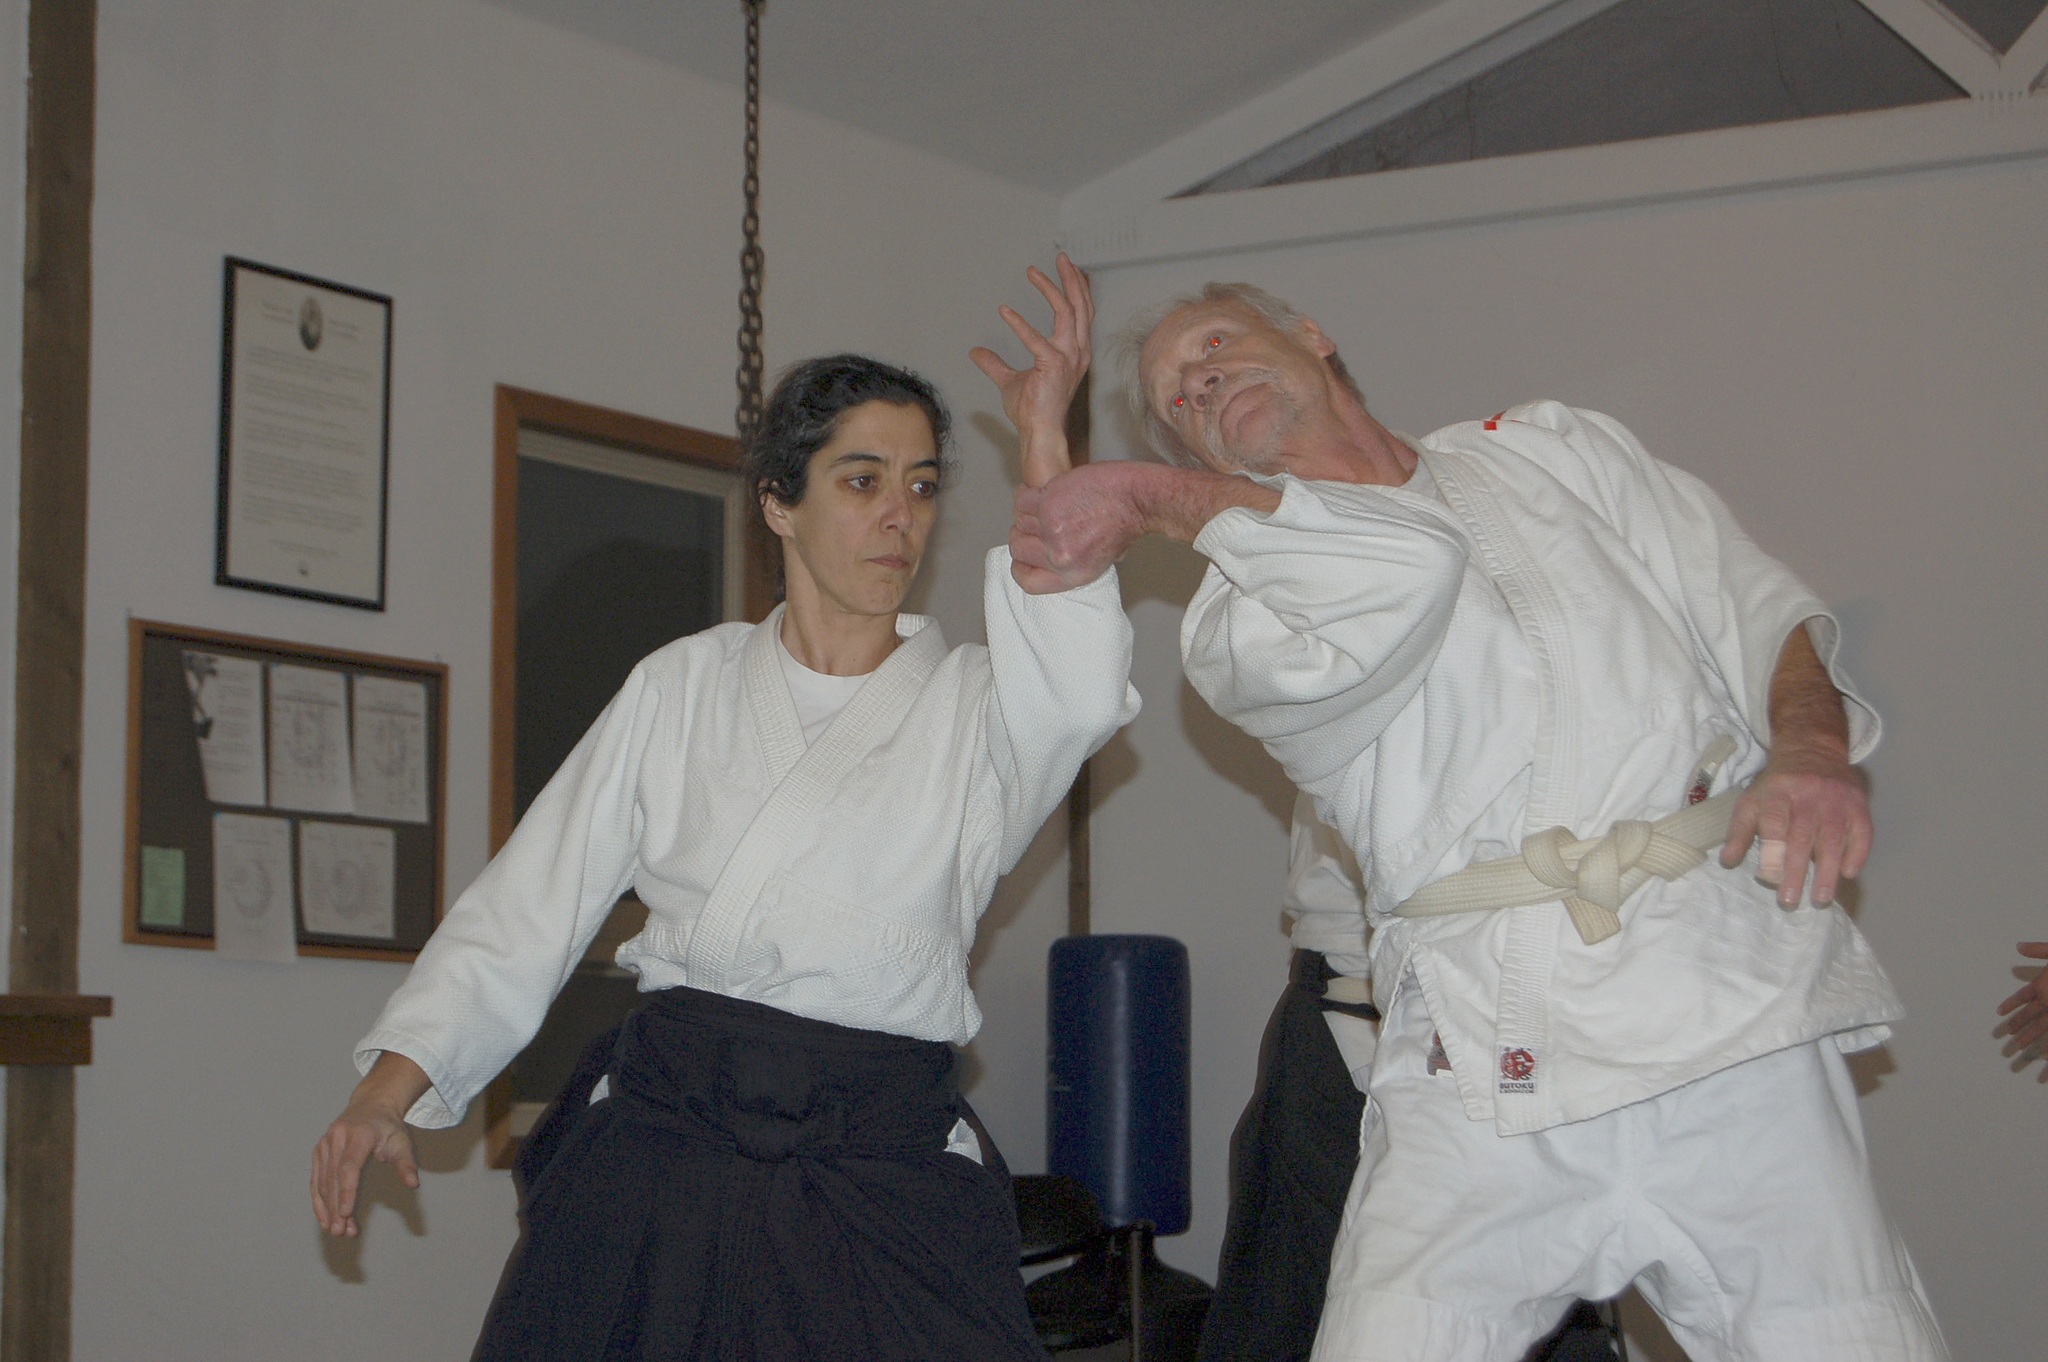 Chief Aikido instructor Neilu Naini pairs up with student Andy Brastad during a warm-up exercise at the Aikido Dojo off Carlsborg Road in Sequim. Sequim Gazette photos by Erin Hawkins